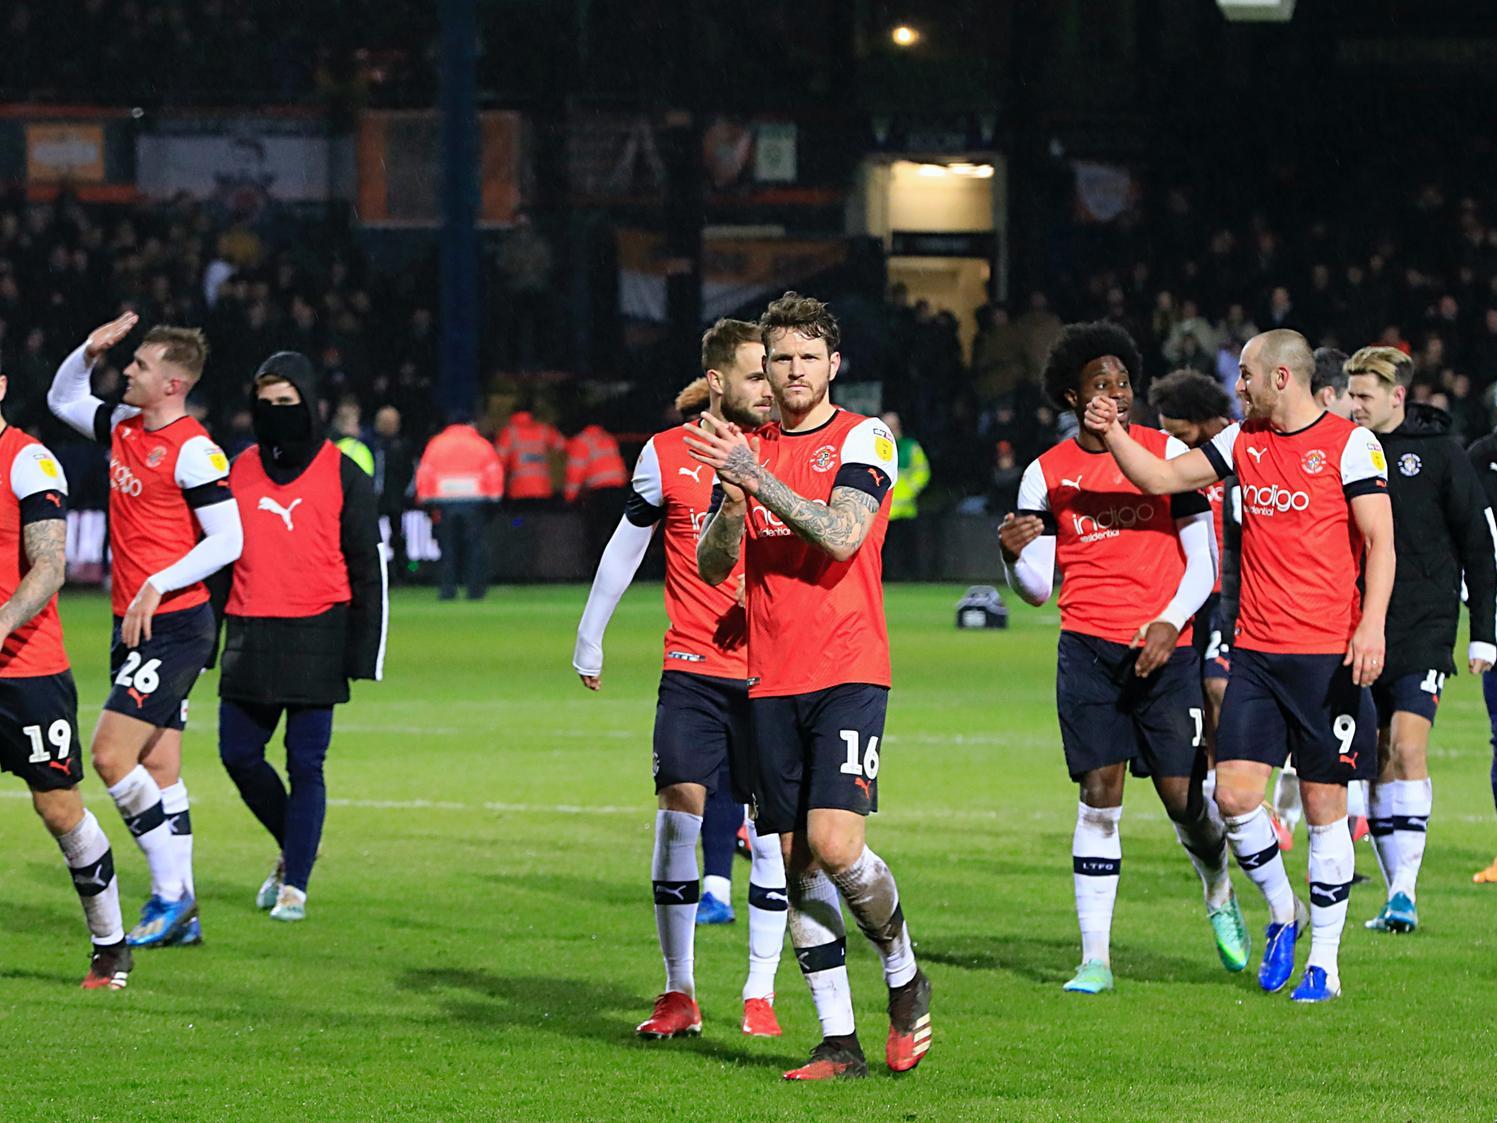 Glen Rea leads the applause after Town celebrate beating Sheffield Wednesday 1-0 at Kenilworth Road